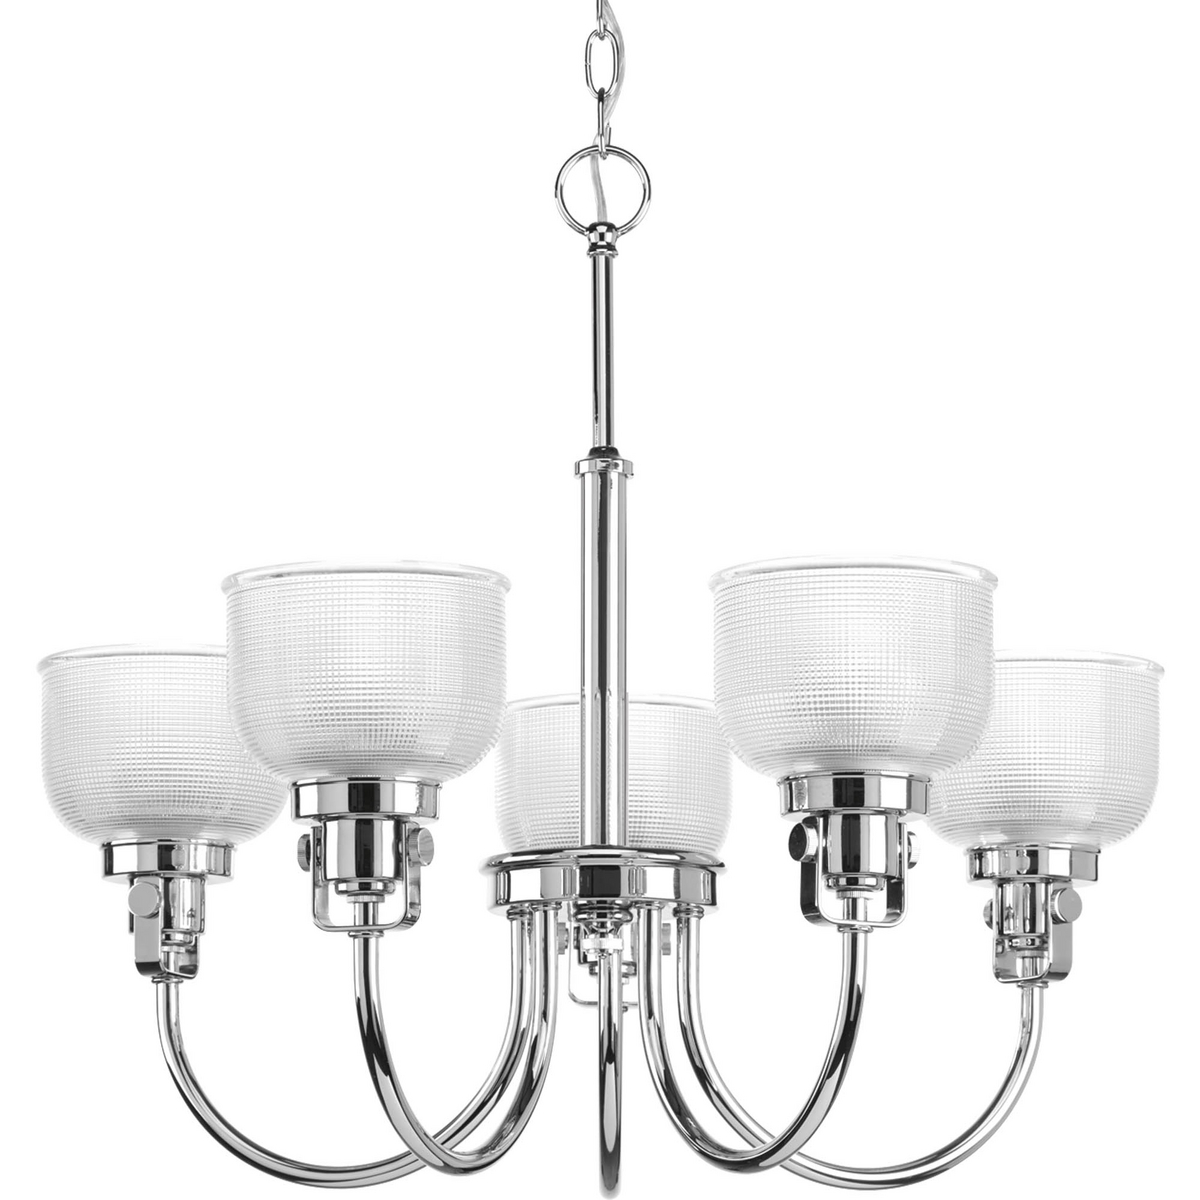 The Archie Collection brings a vintage, industrial flair to interior settings. The collection�s distinctive double prismatic glass adds visual interest as its crisscross pattern comes to life when illuminated. The distinctive finely crafted strap and knob detail adds authentic industrial flair. This versatile five-light chandelier can be installed with the glass facing up or down. Polished Chrome finish.